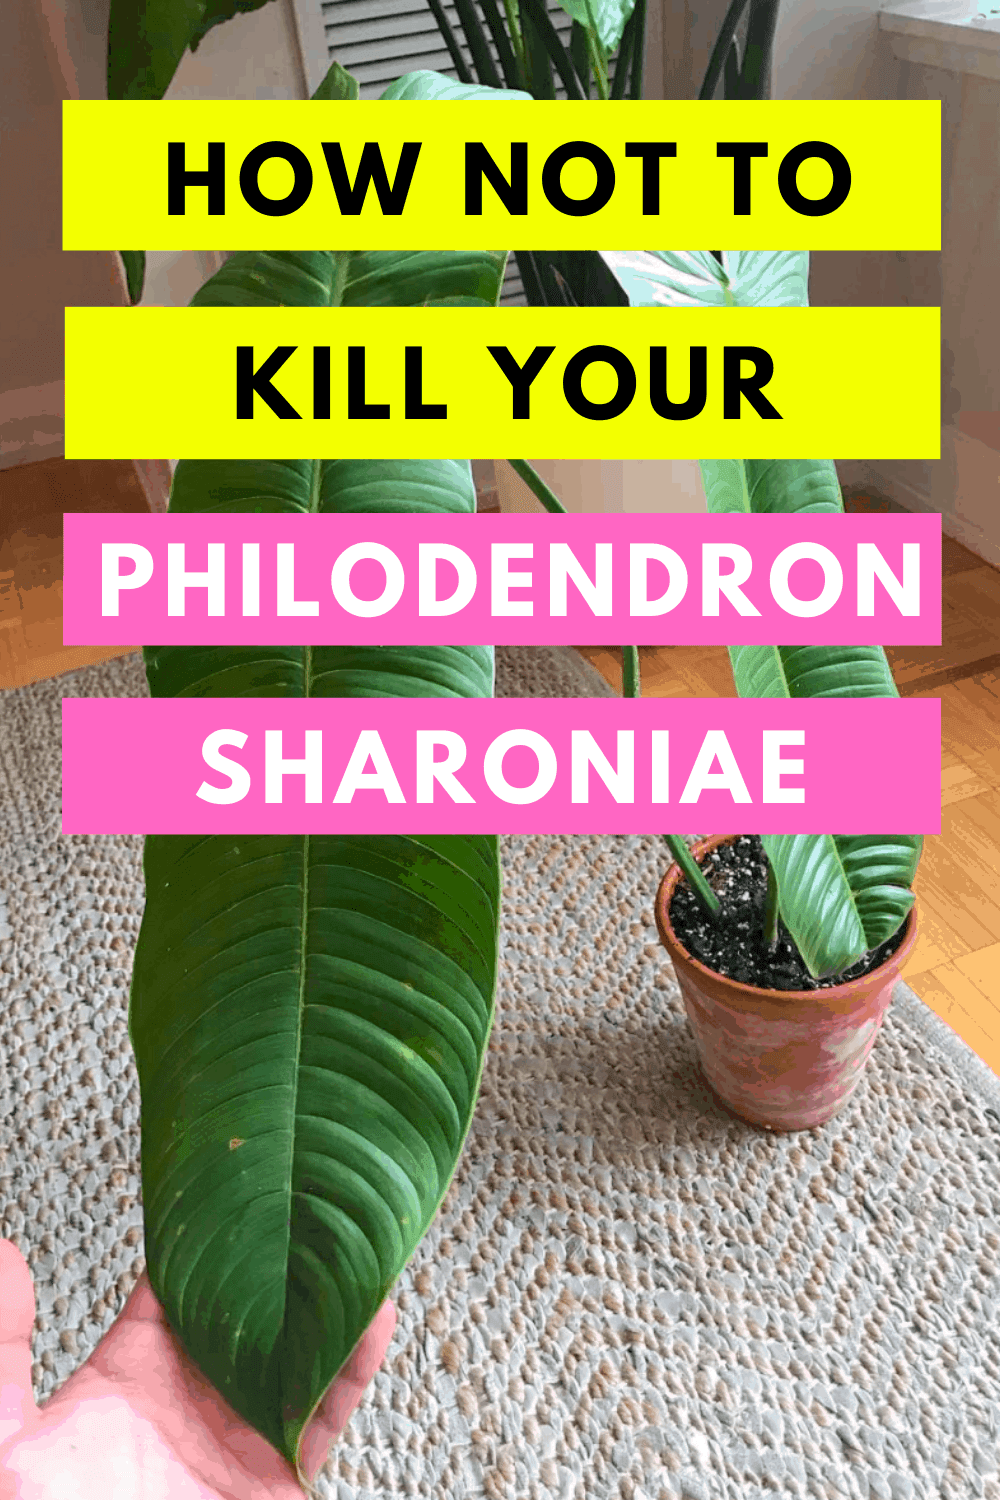 Philodendron Sharoniae Care in a Nutshell 1